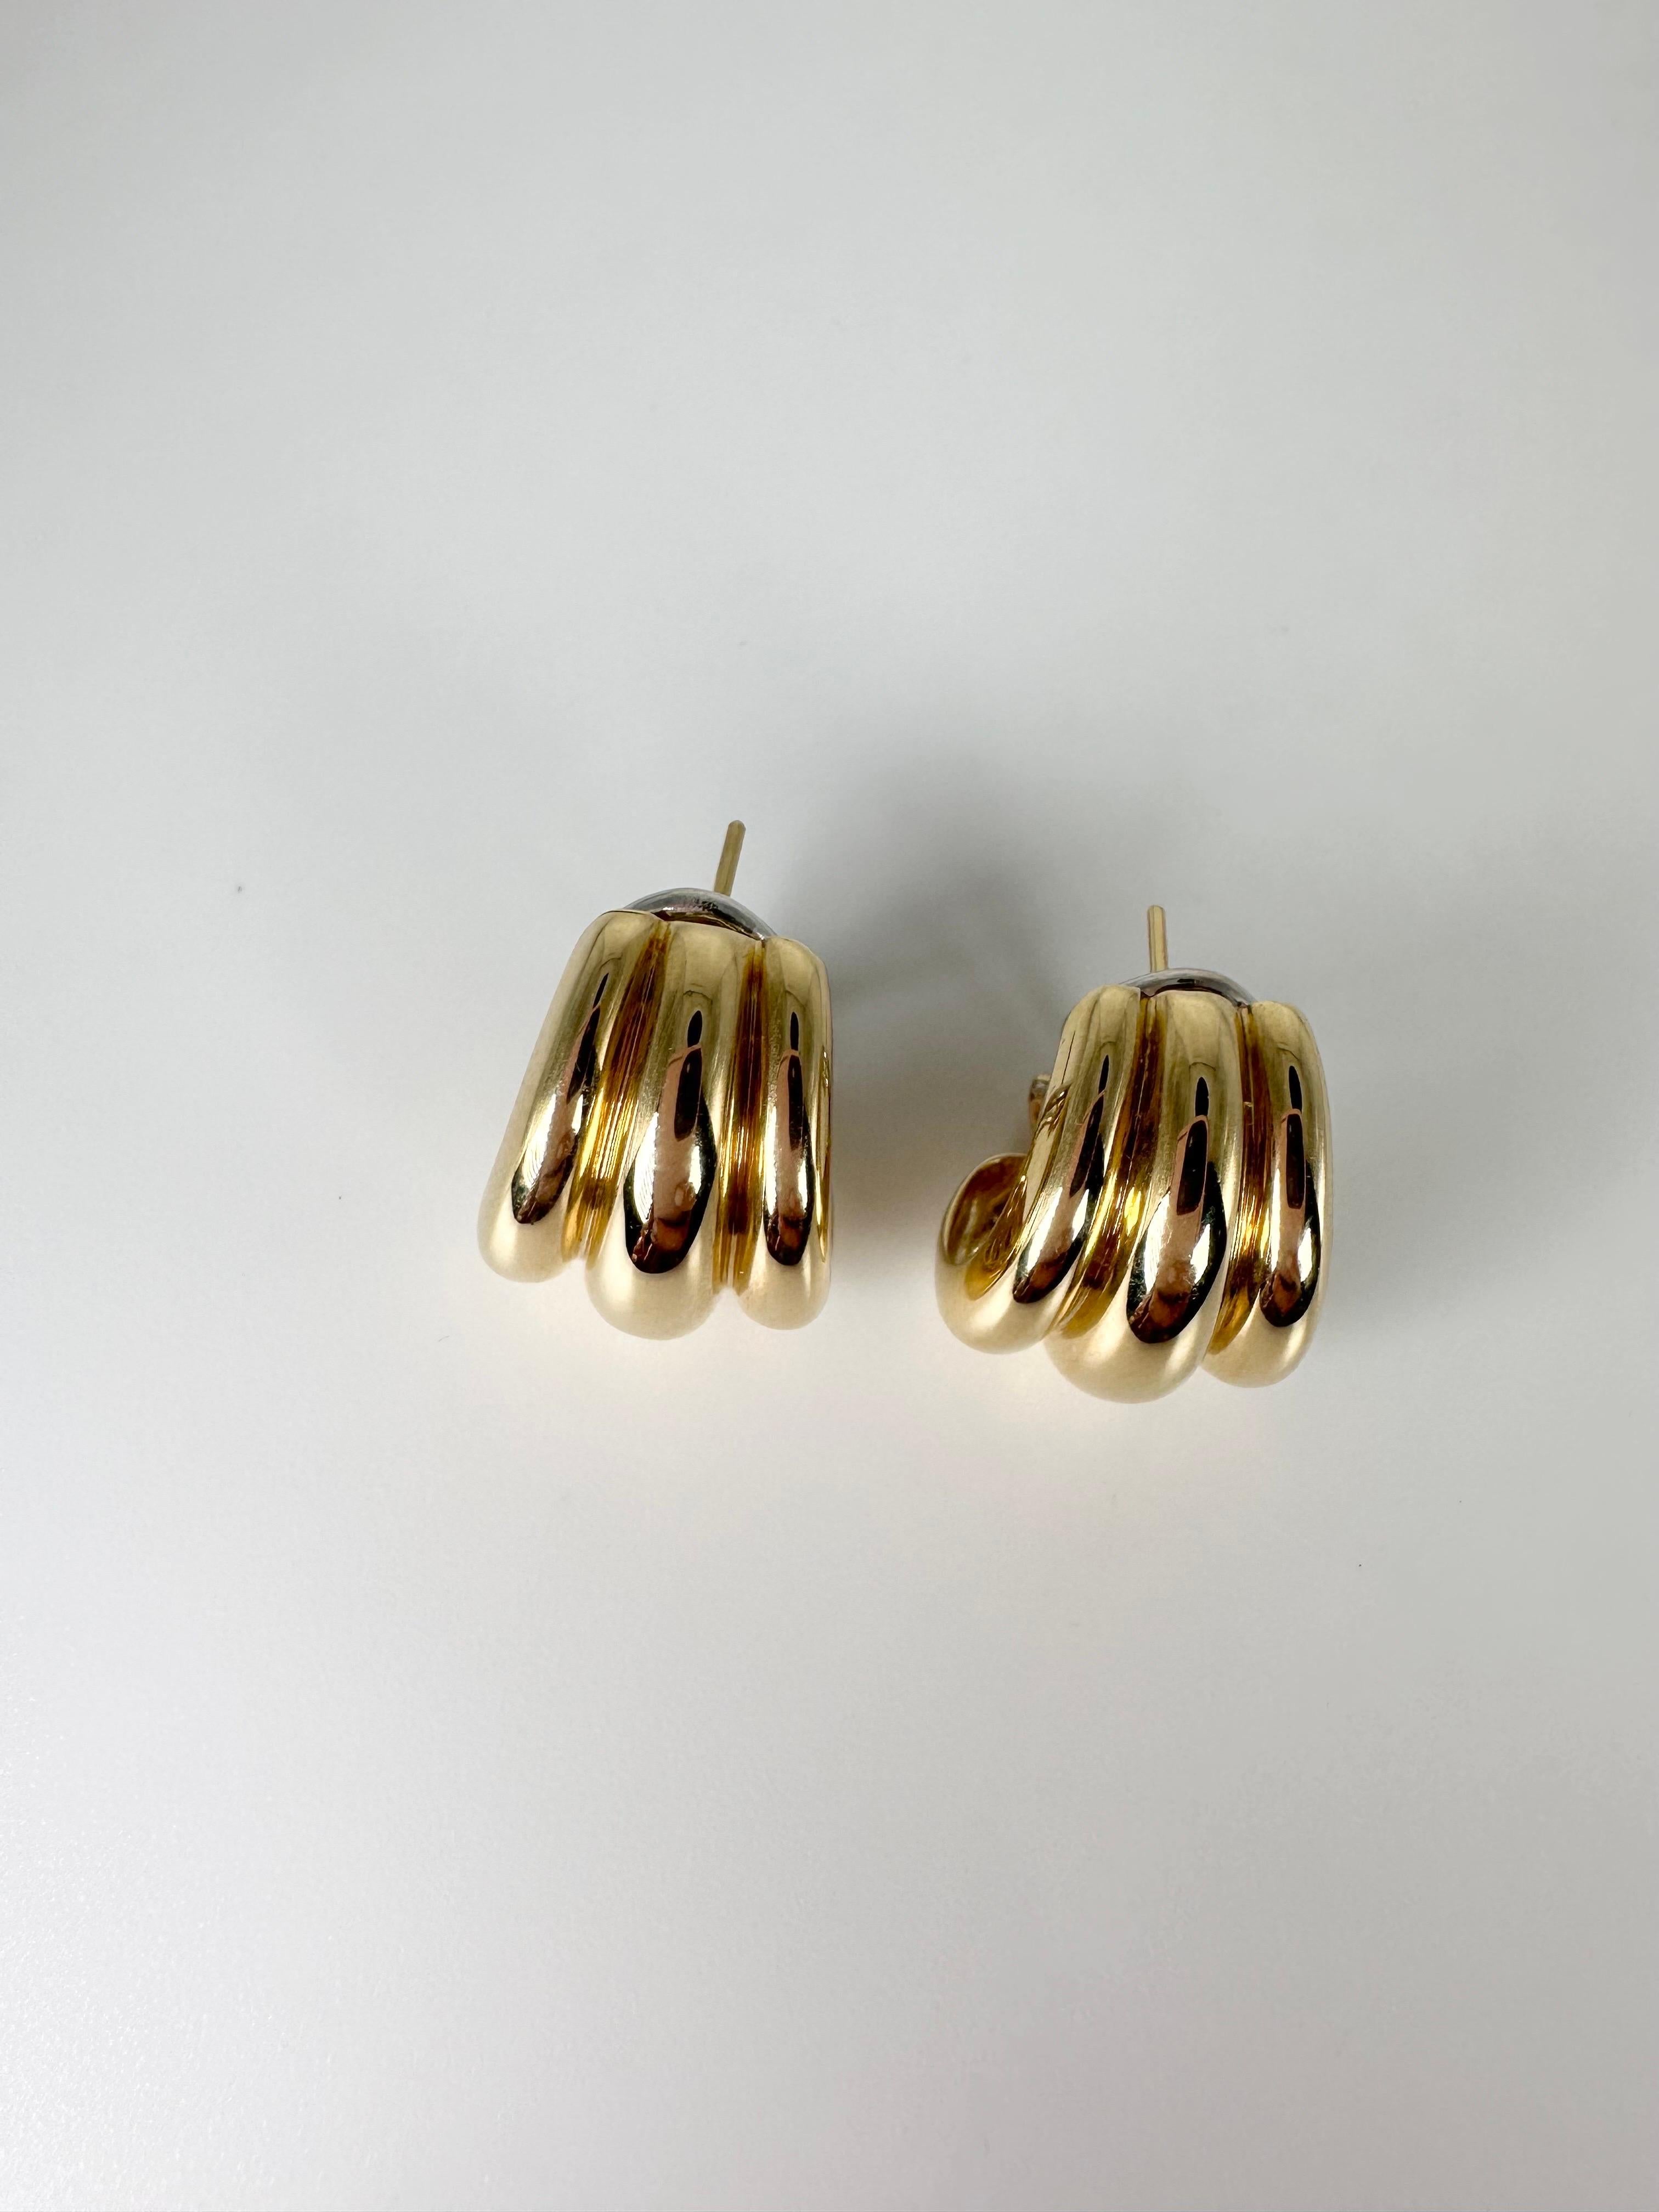 Classy gold earrings made in 18kt yellow gold, they look great with any outfit and feel very comfortable when on ear, inspired by shells by the sea, enjoy these beautiful works of art evening or day!

GOLD: 18KT gold
Grams:10
Item#: